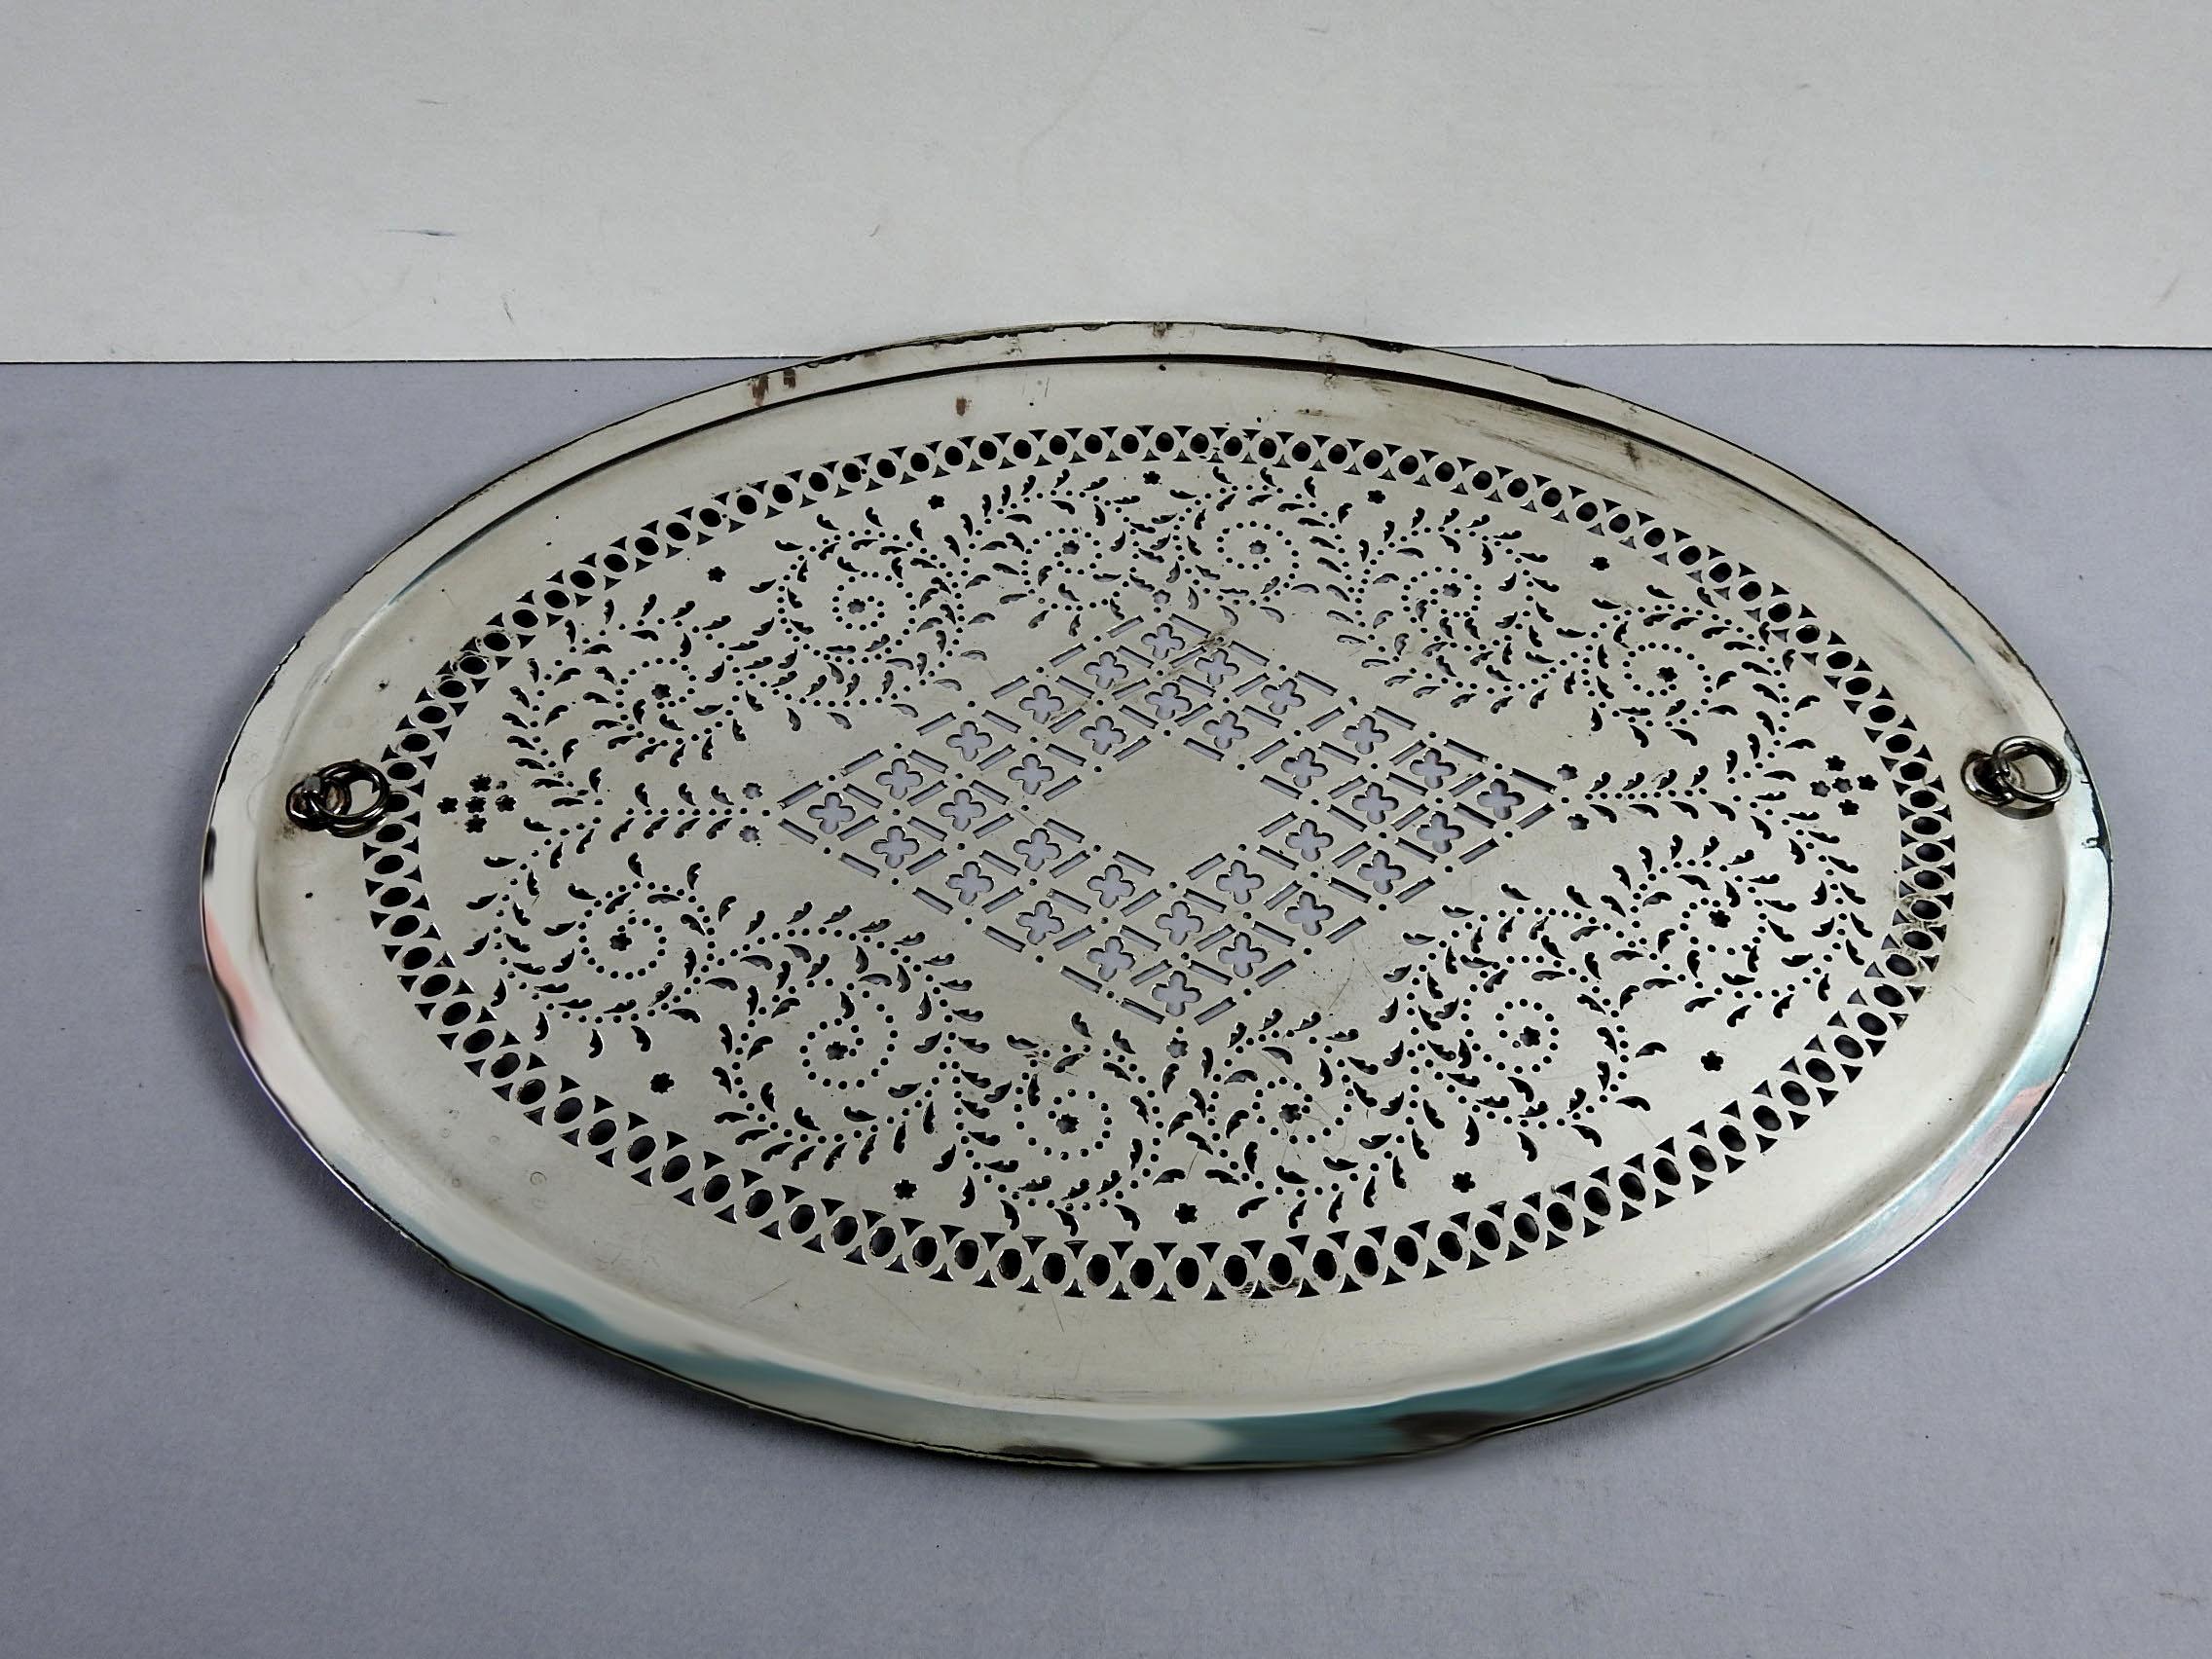 Circa 1815 Sheffield silverplate over copper and hand pierced mazarine tray (strainer). No markings, attached rings for lifting. Overall patina, minor plate loss.